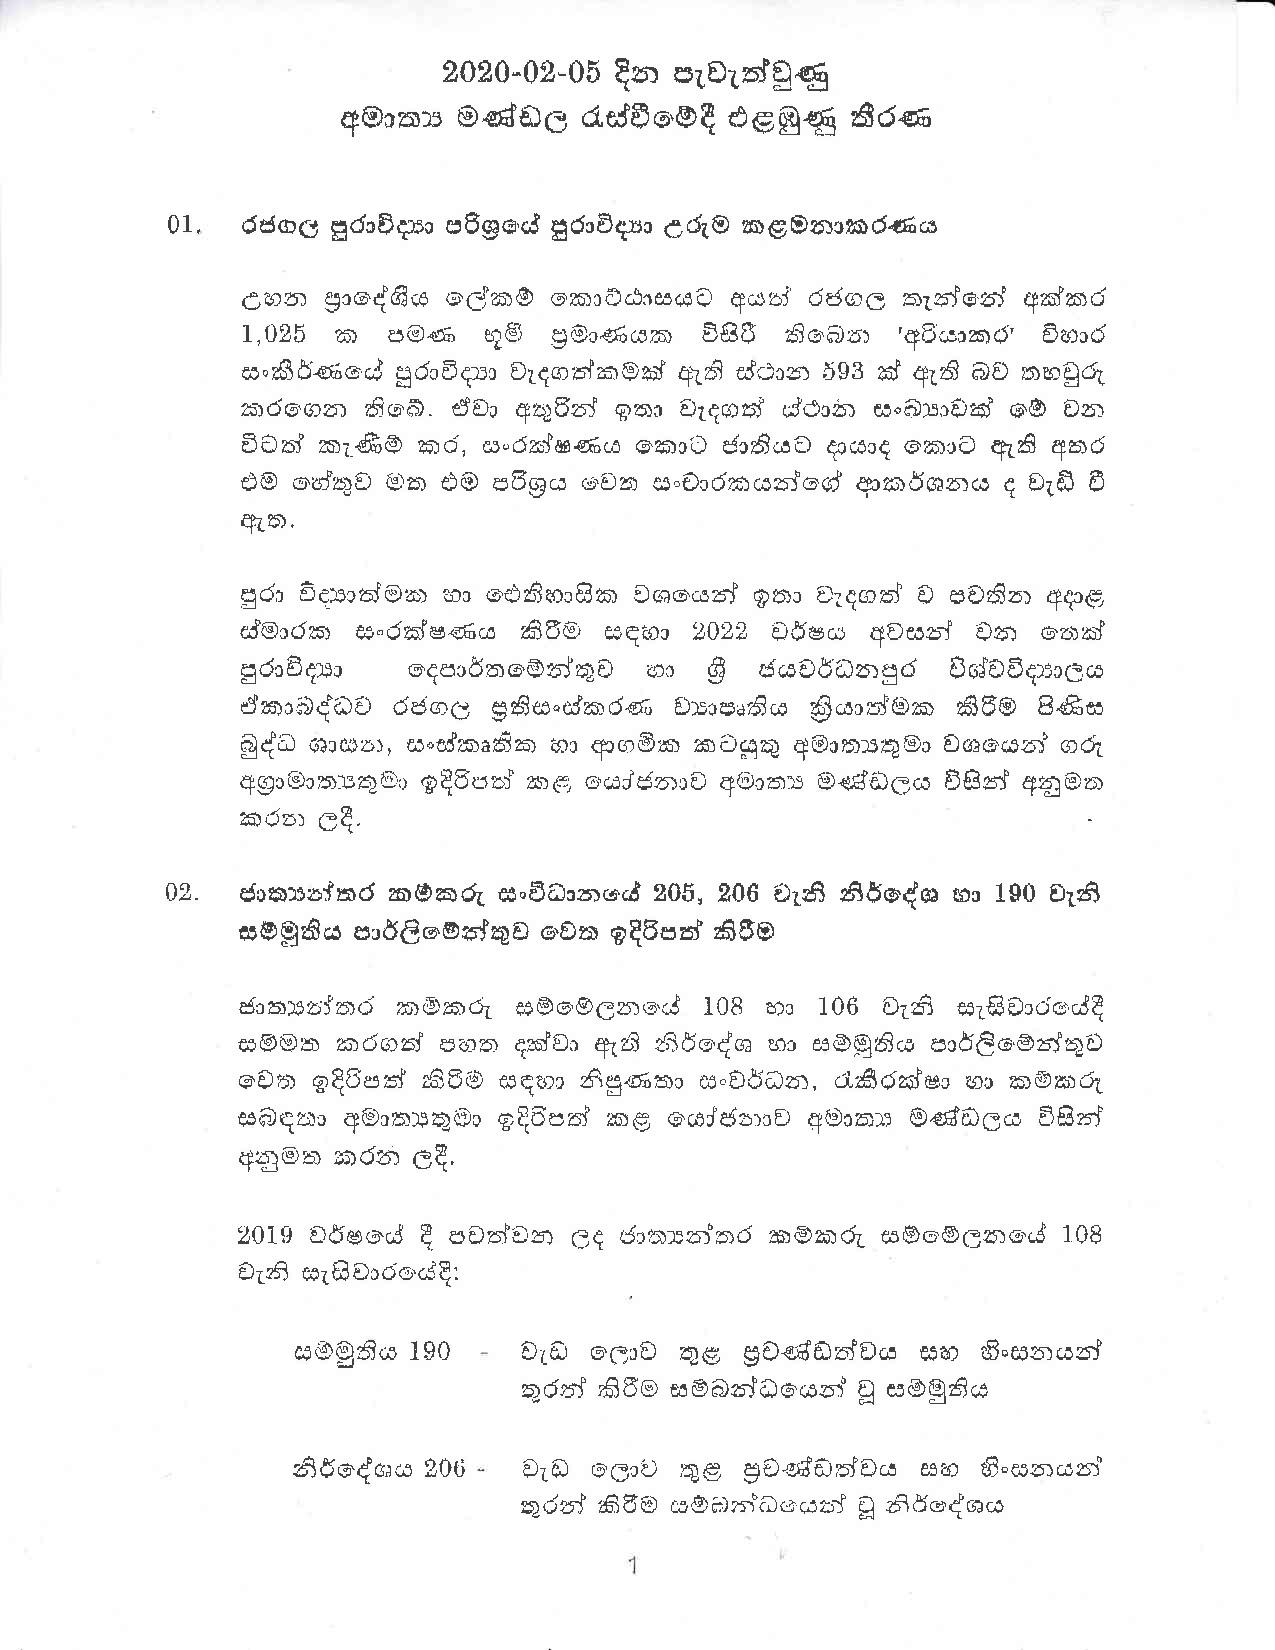 Cabinet Decision on 05.02.2020 page 001